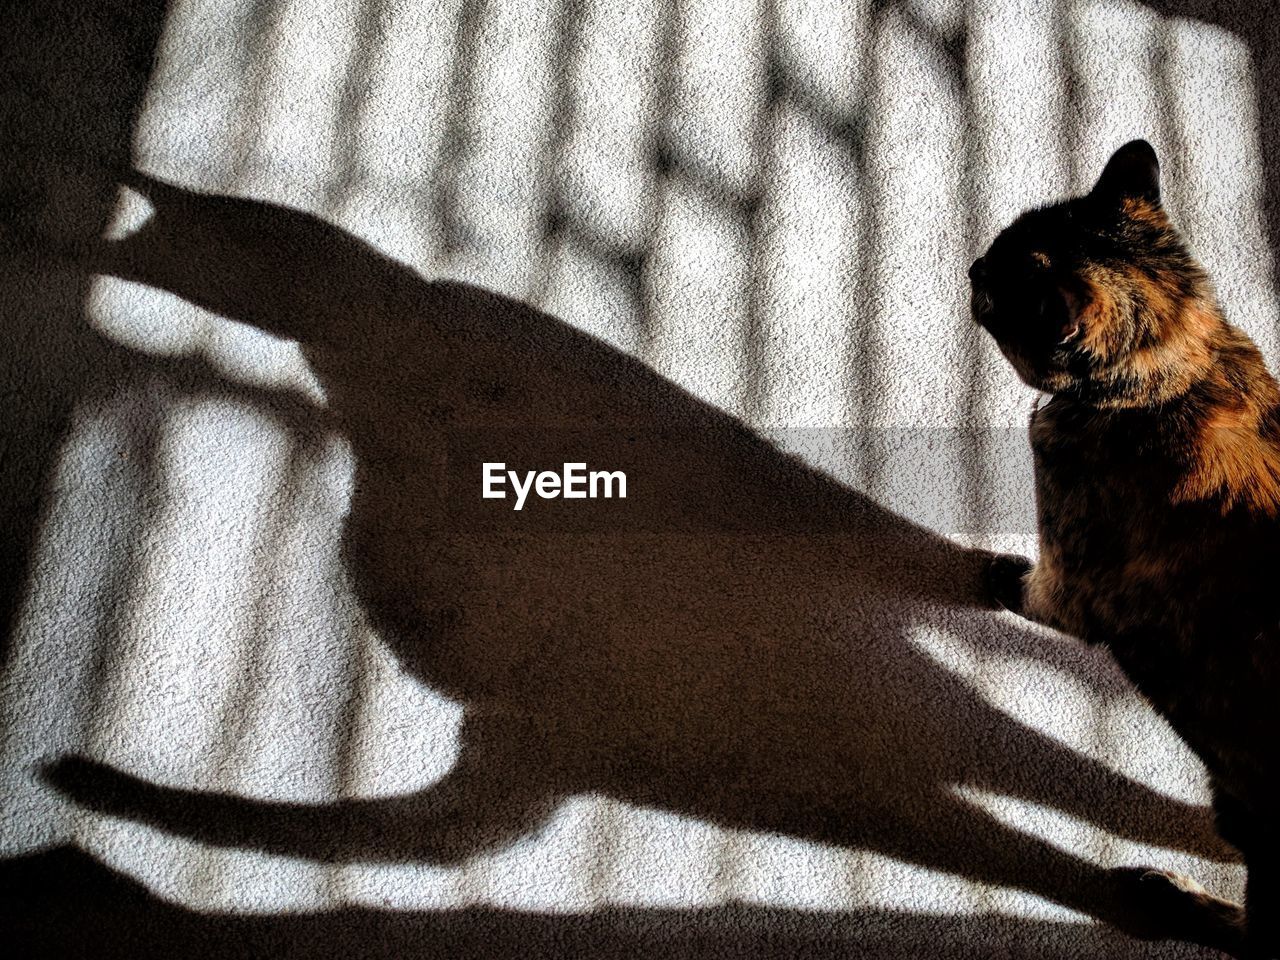 CLOSE-UP OF CAT SHADOW ON PERSON